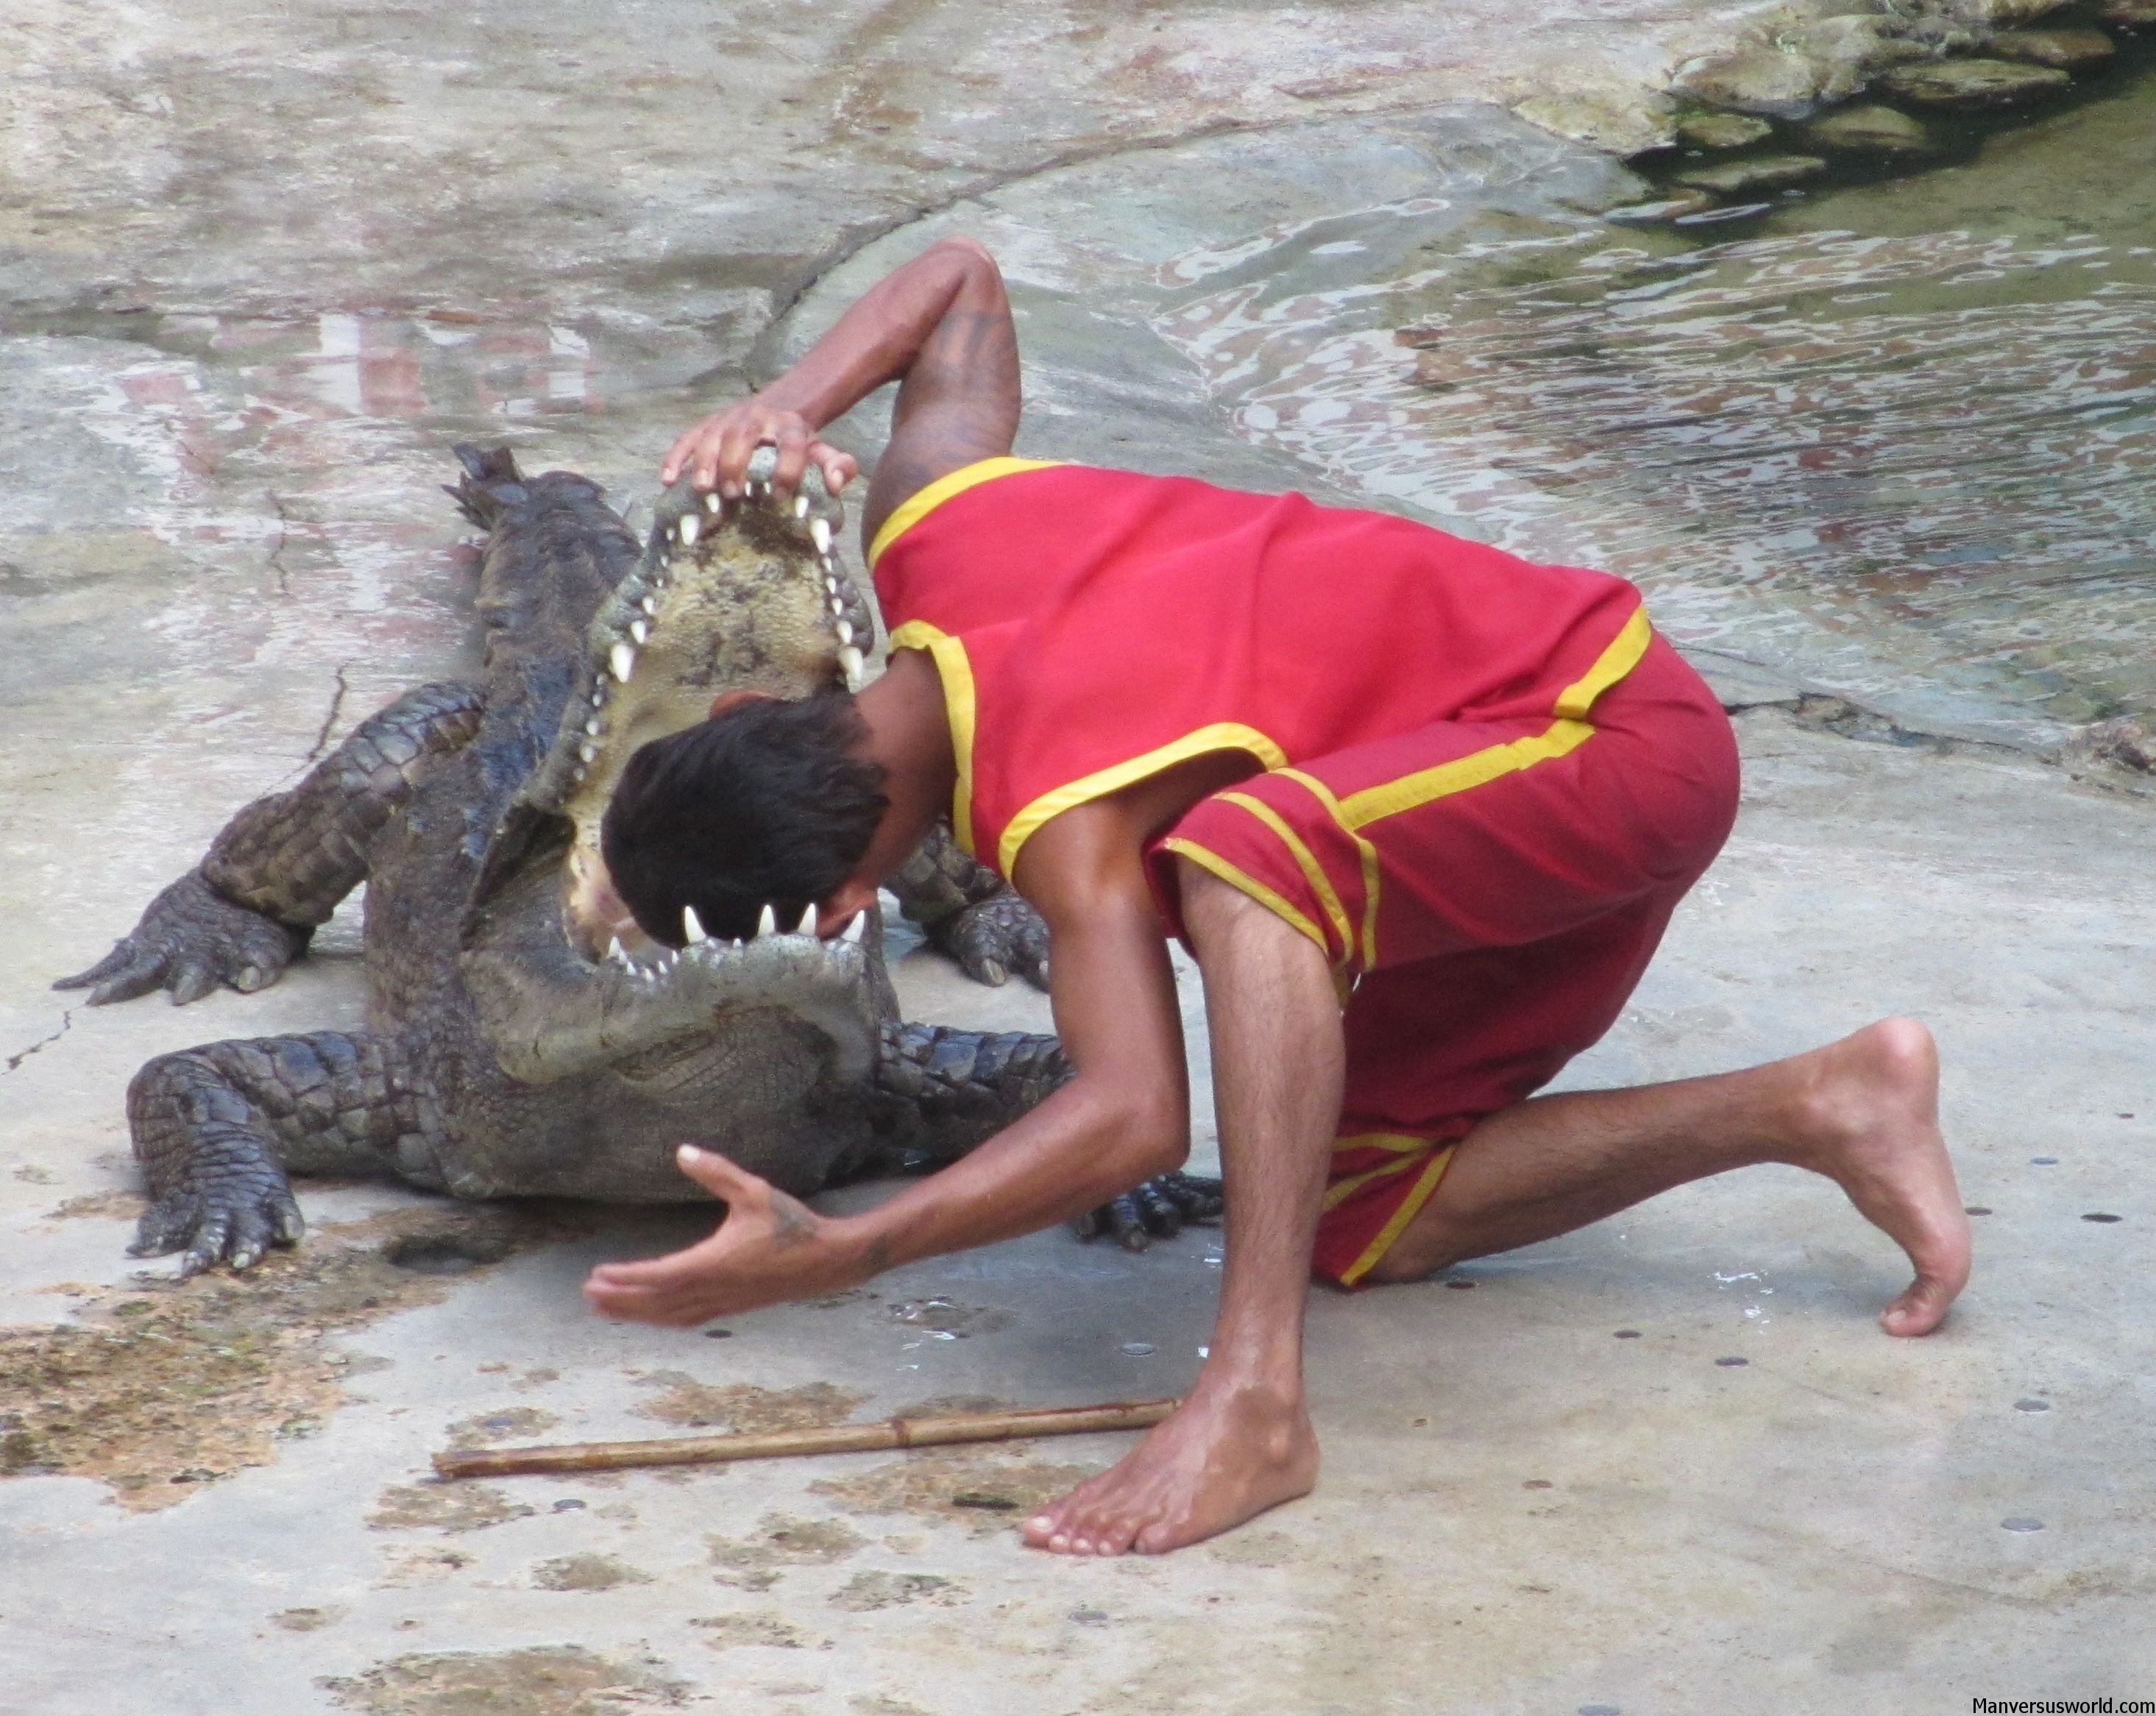 A man puts his head inside a croc's gaping mouth.